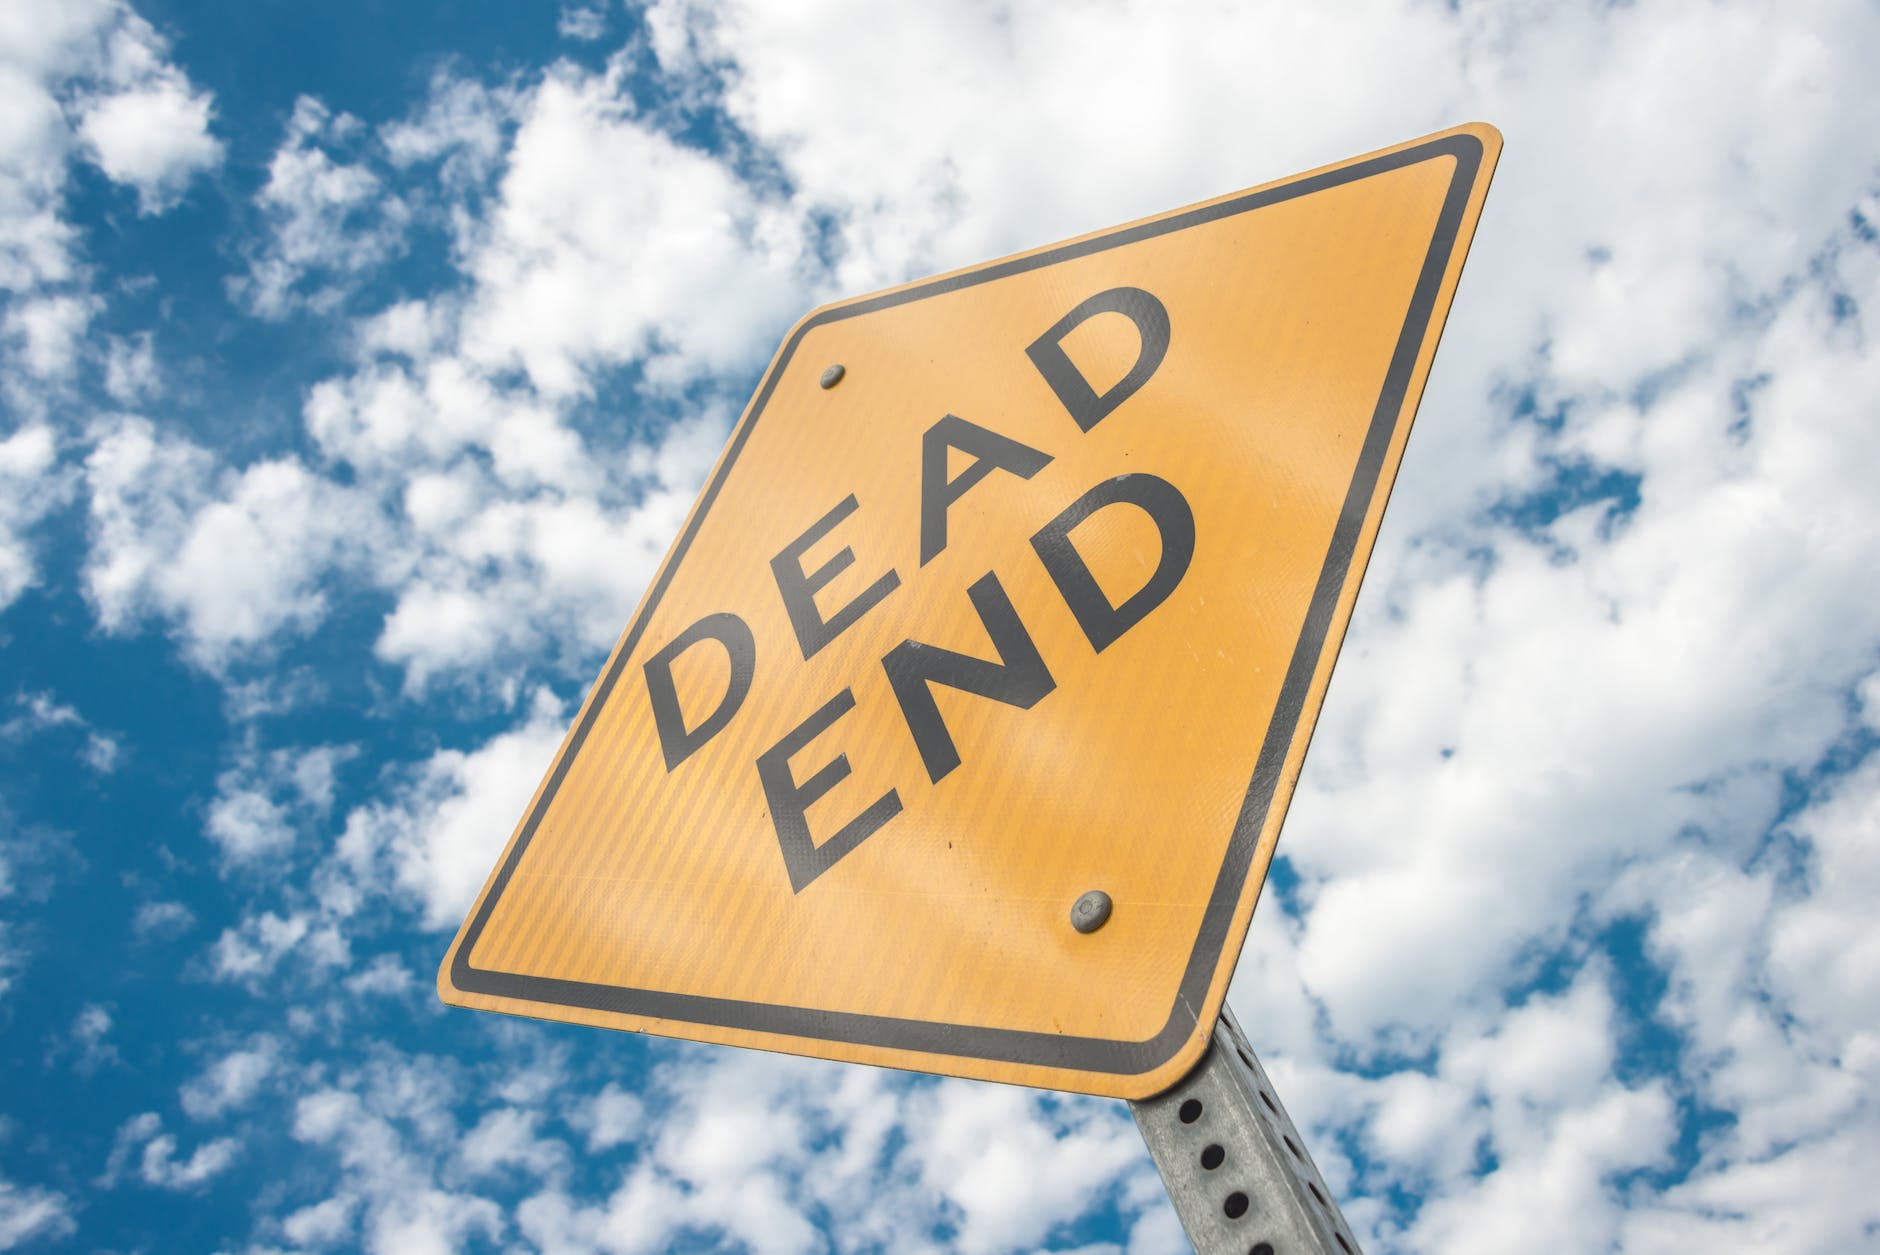 Yellow dead end sign during day time